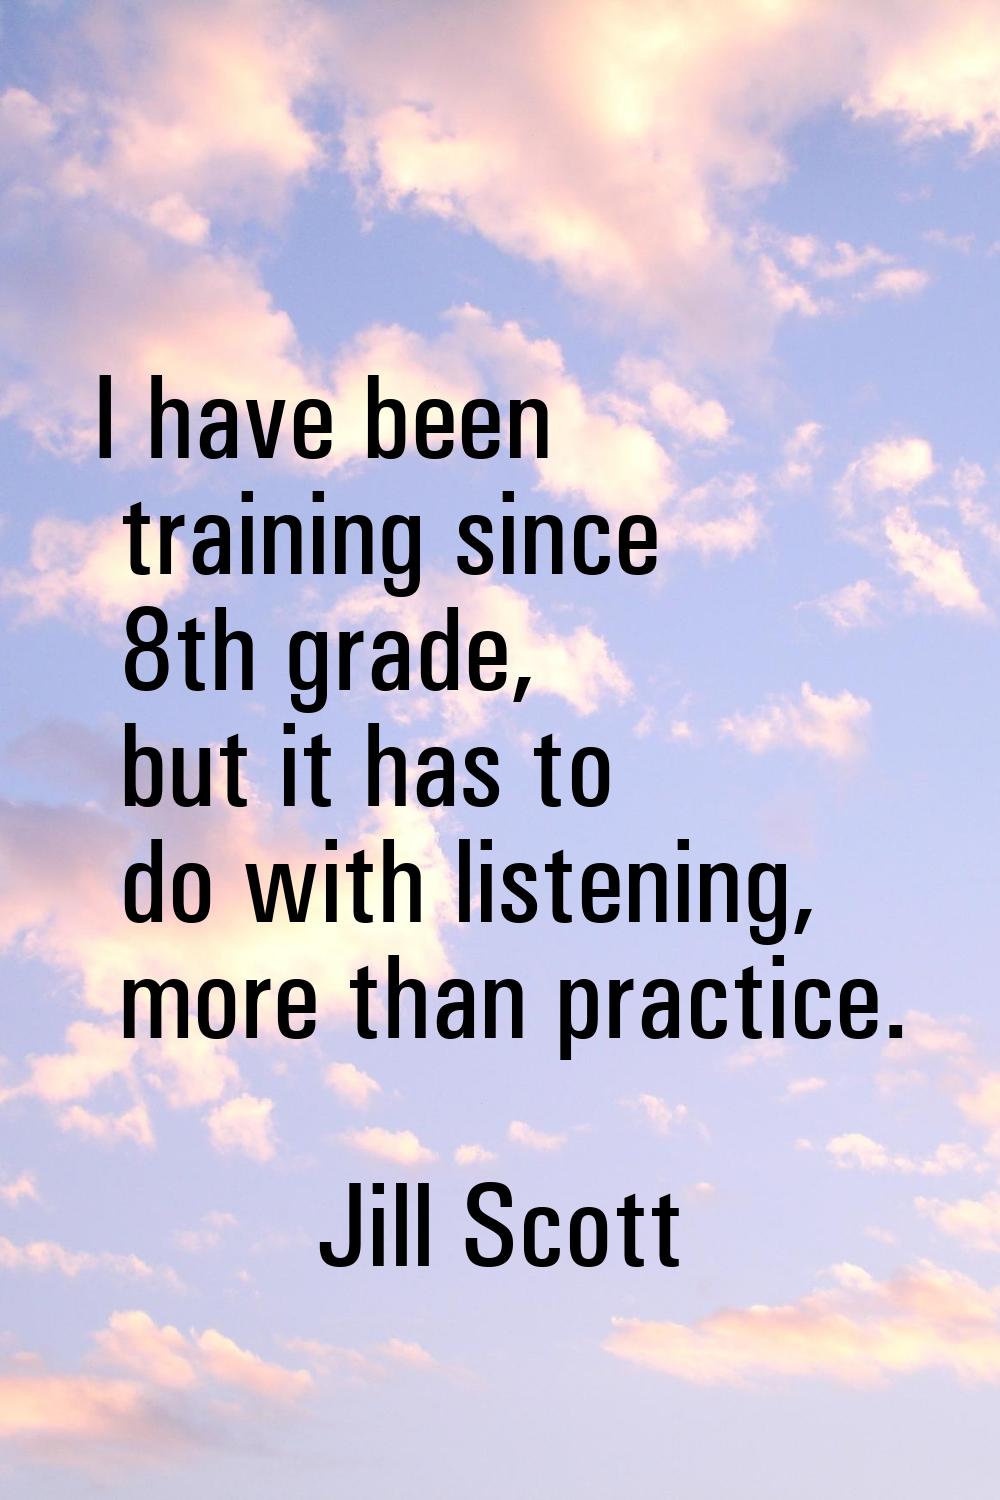 I have been training since 8th grade, but it has to do with listening, more than practice.